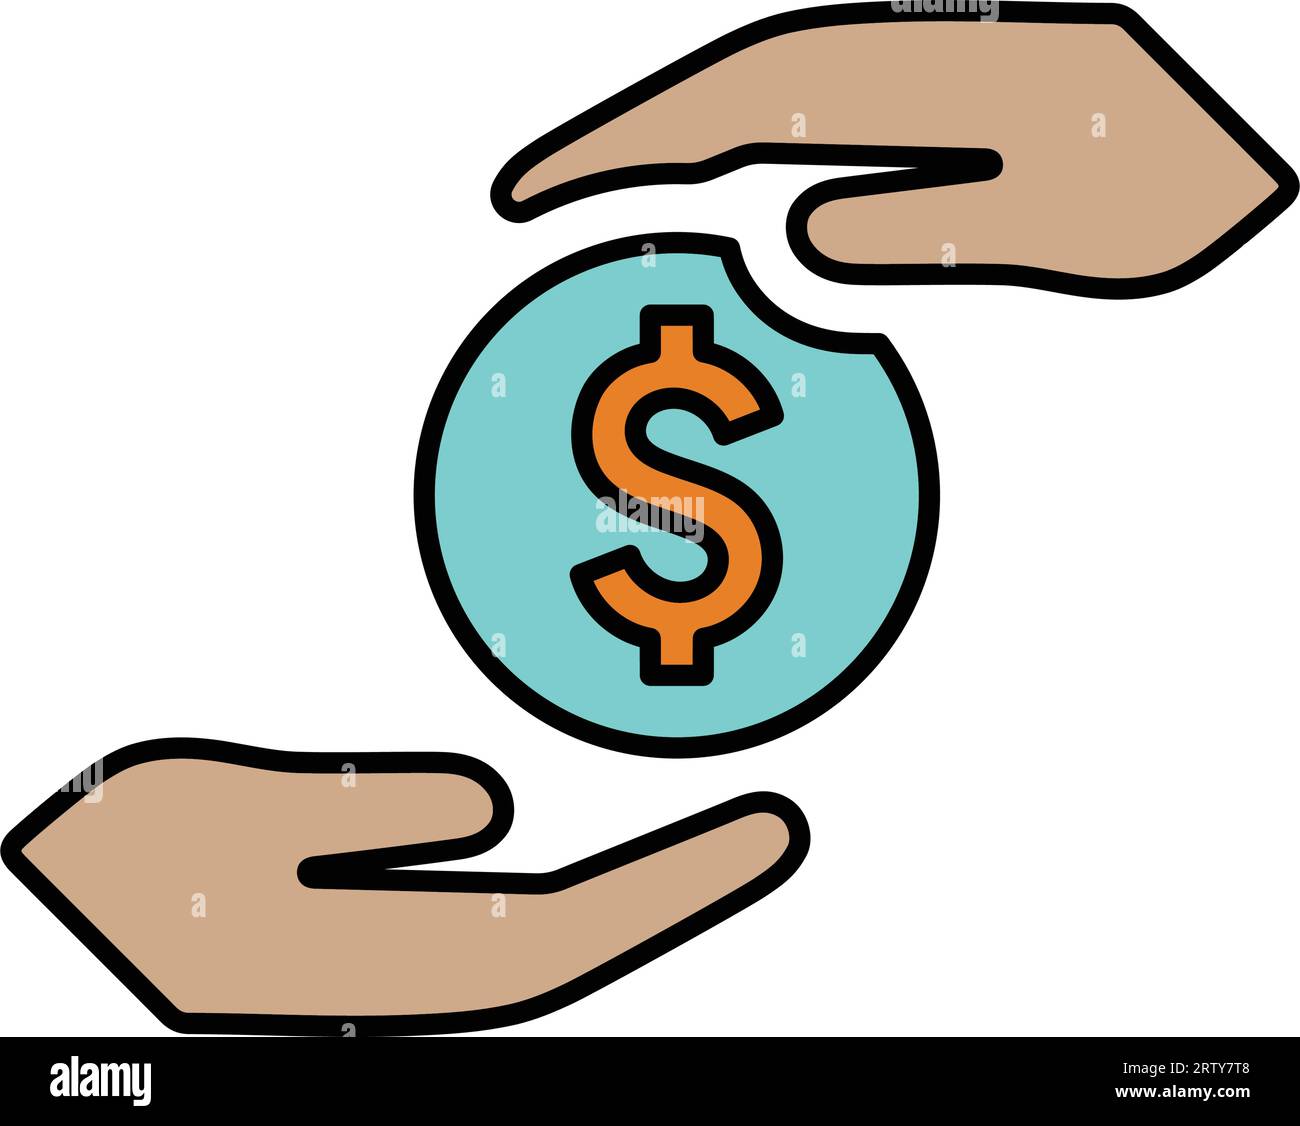 Money Help icon - Perfect use for printed files and presentations, designing and developing websites, promotional materials, illustrations or any type Stock Vector